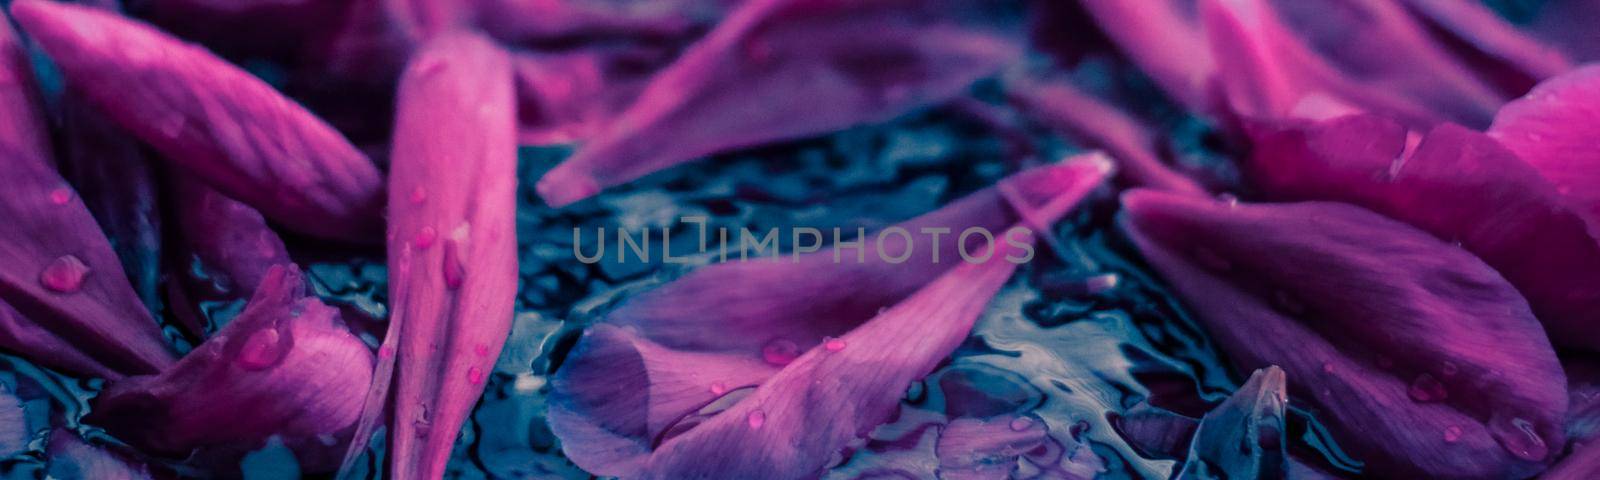 Beauty of nature, dream garden and wedding backdrop concept - Abstract floral background, purple flower petals in water